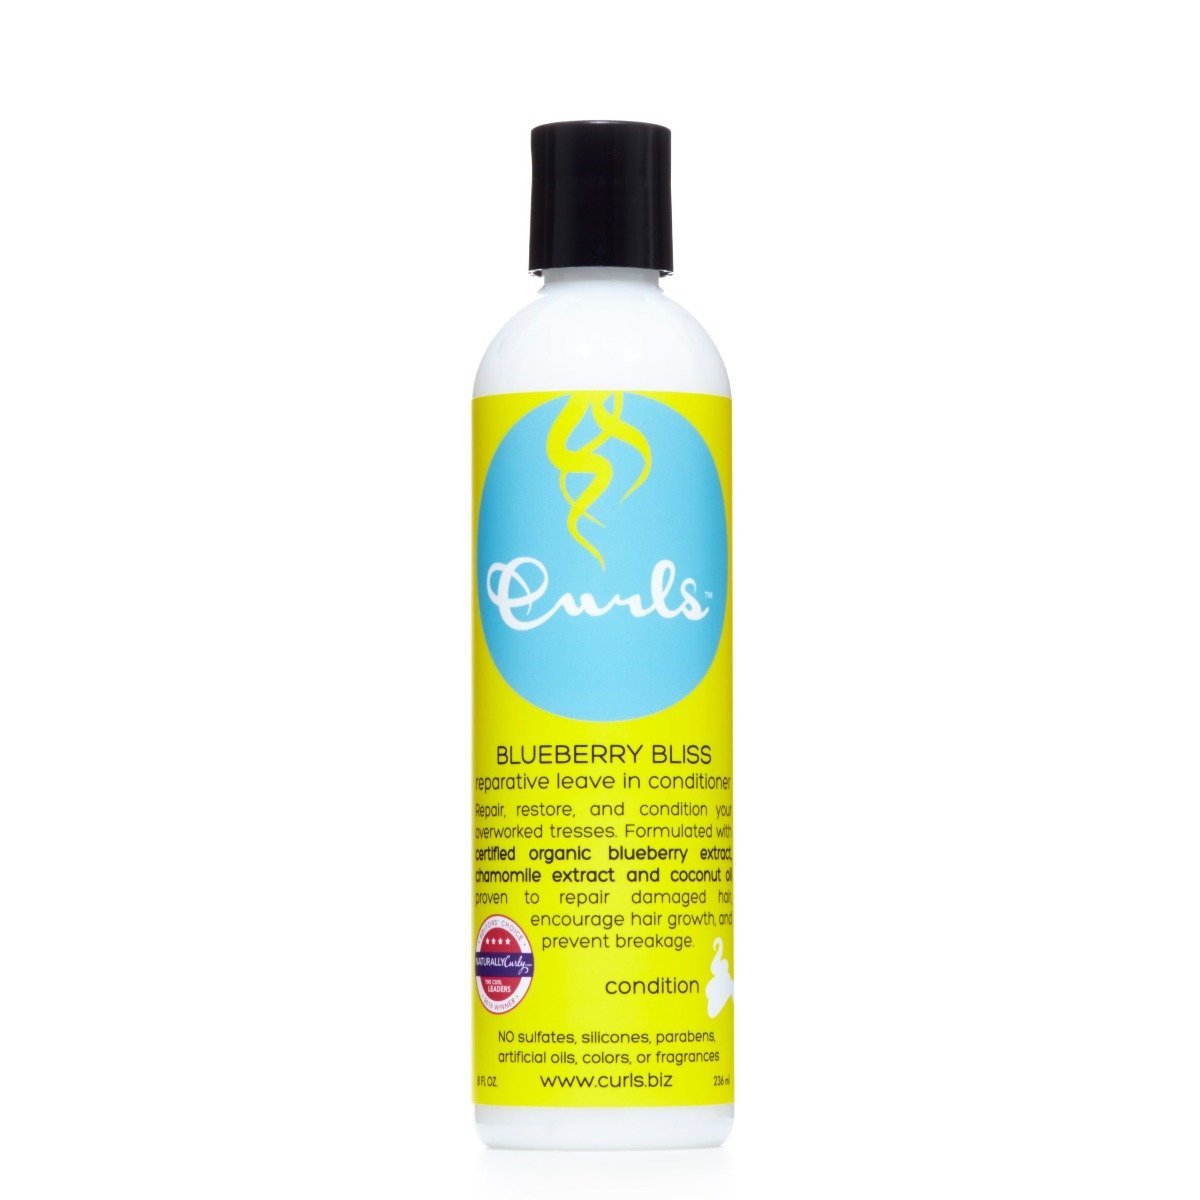 Curls Blueberry Bliss Reparative Leave In Conditioner - 236ml - Bloom Pharmacy